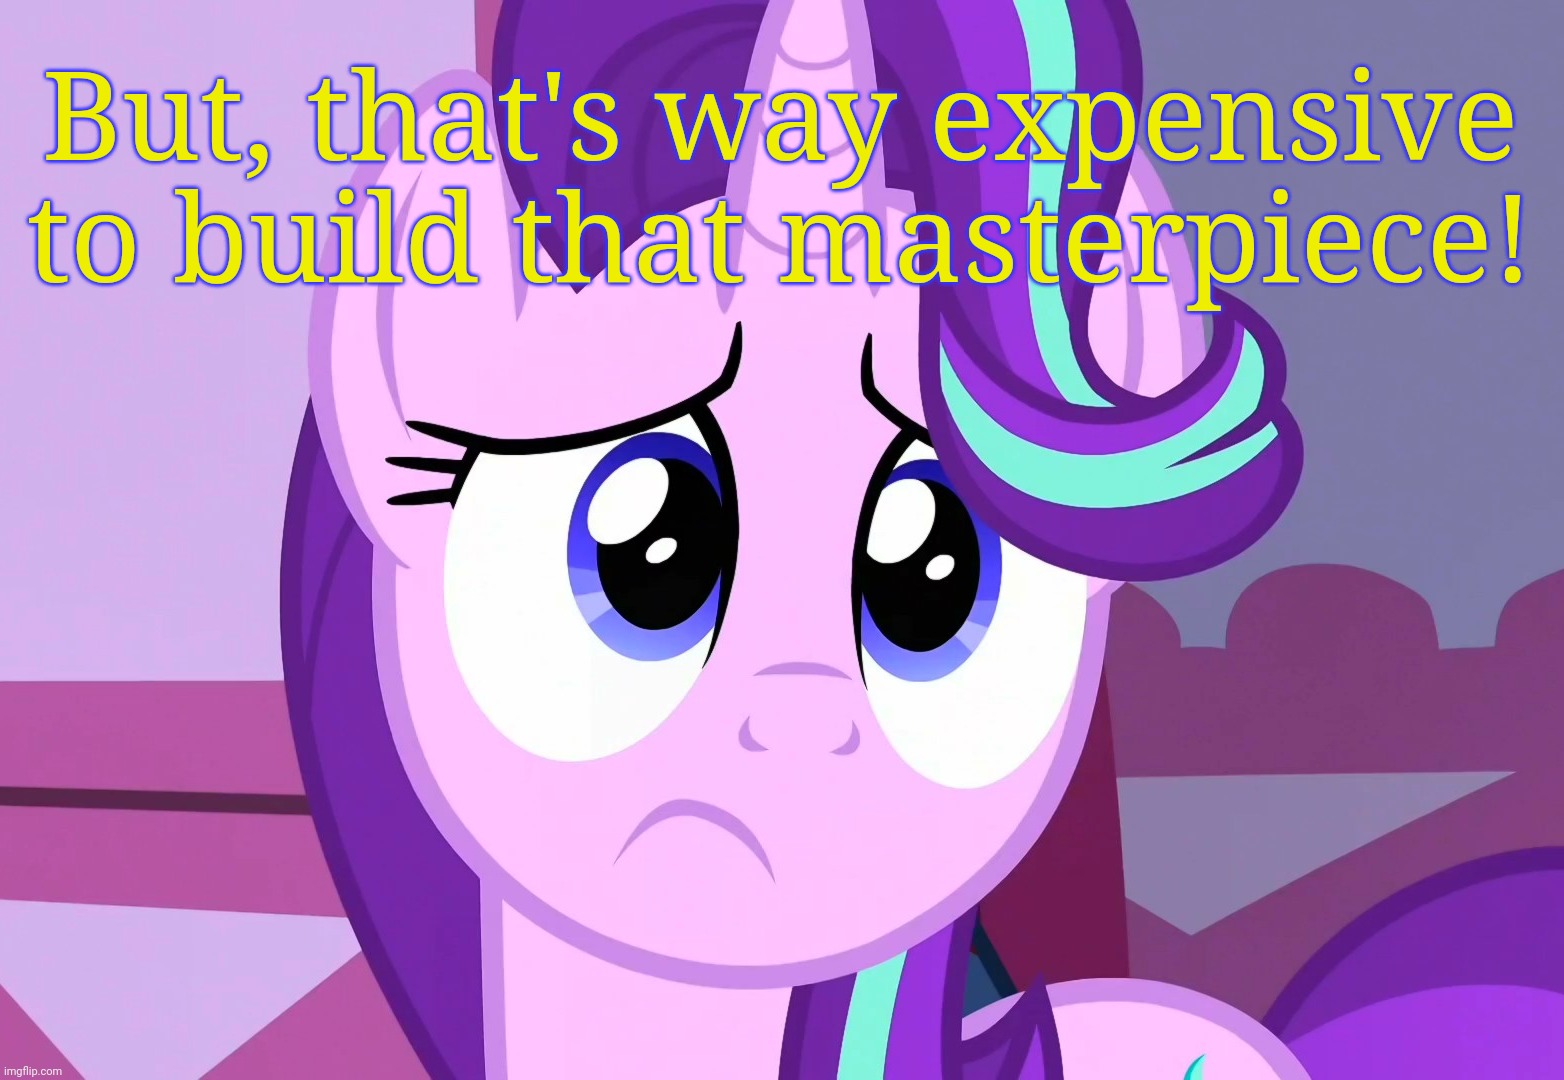 Sadlight Glimmer (MLP) | But, that's way expensive to build that masterpiece! | image tagged in sadlight glimmer mlp | made w/ Imgflip meme maker